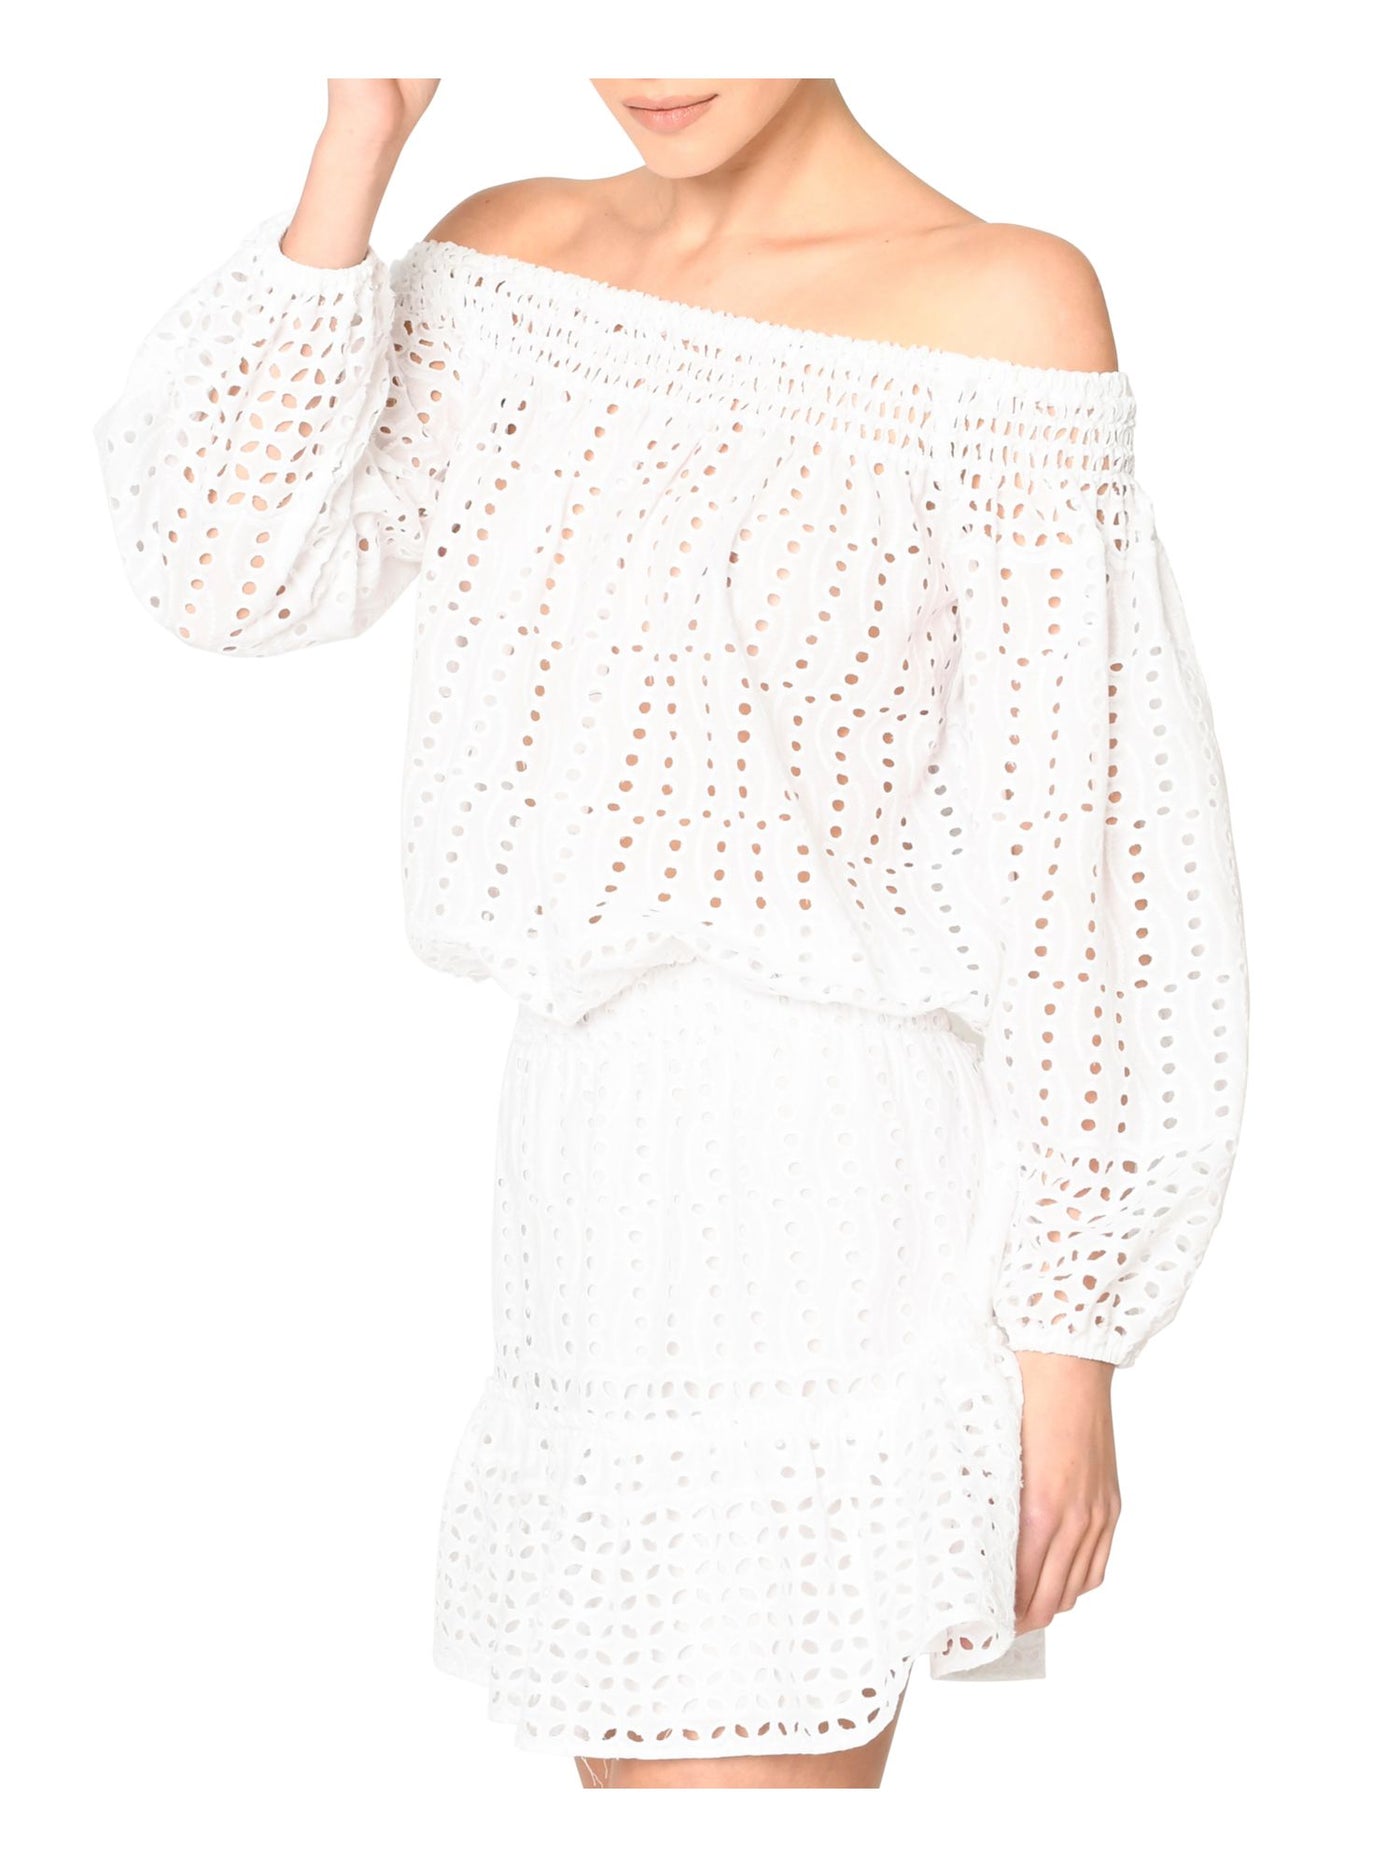 NICOLE MILLER Womens White Stretch Eyelet Smocked Embroidered Scalloped Lined Long Sleeve Off Shoulder Mini Fit + Flare Dress M